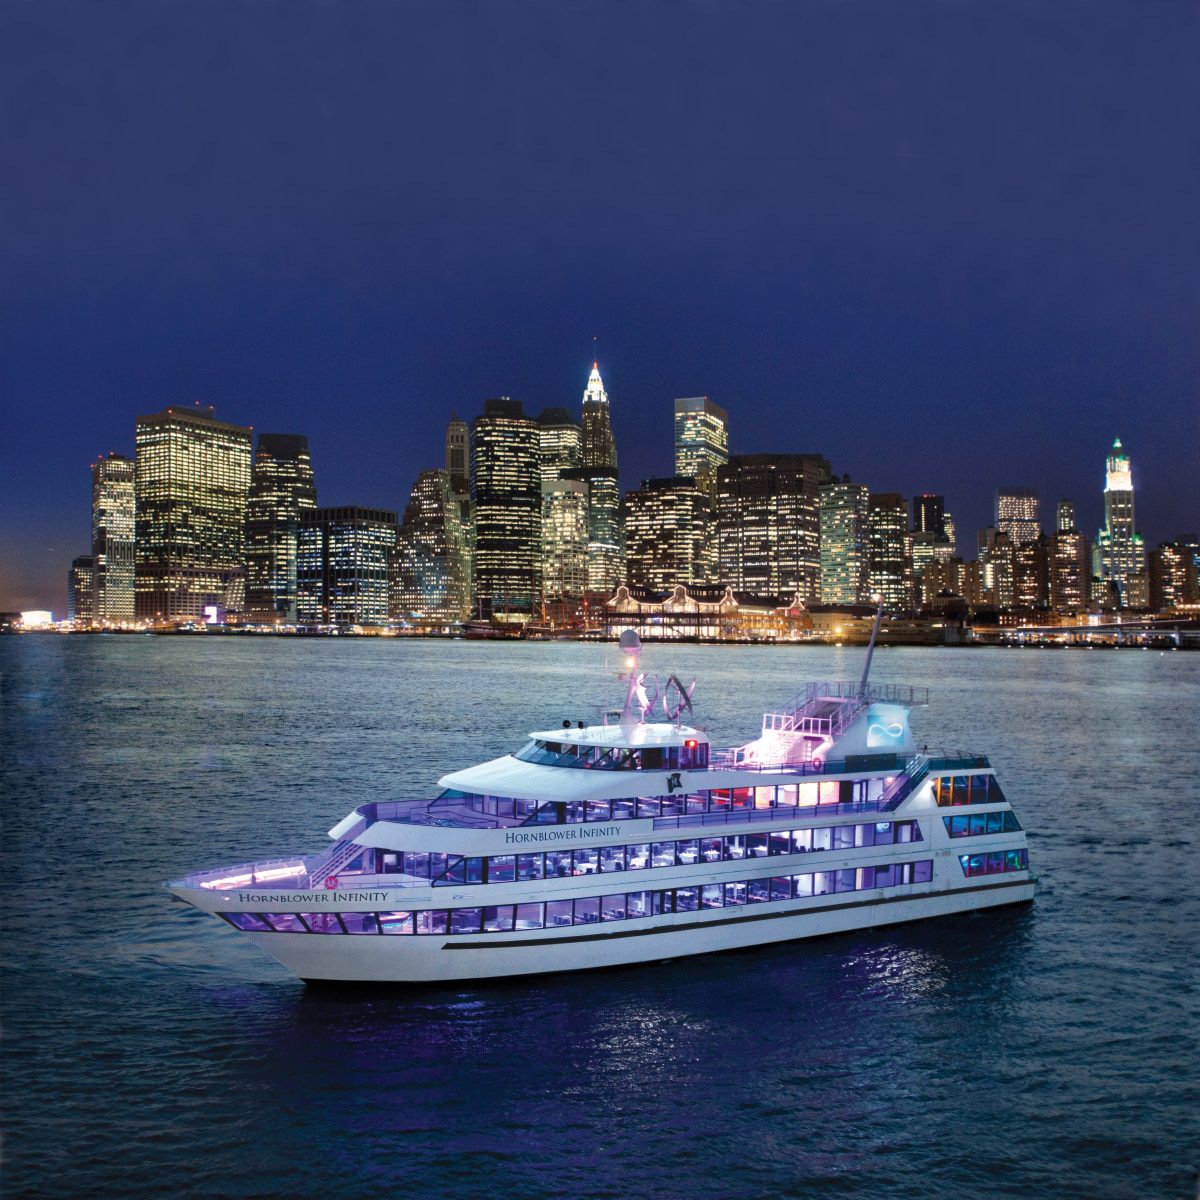 The Hornblower Infinity cruise on the Hudson River. (Courtesy of Hornblower Cruises & Events)
